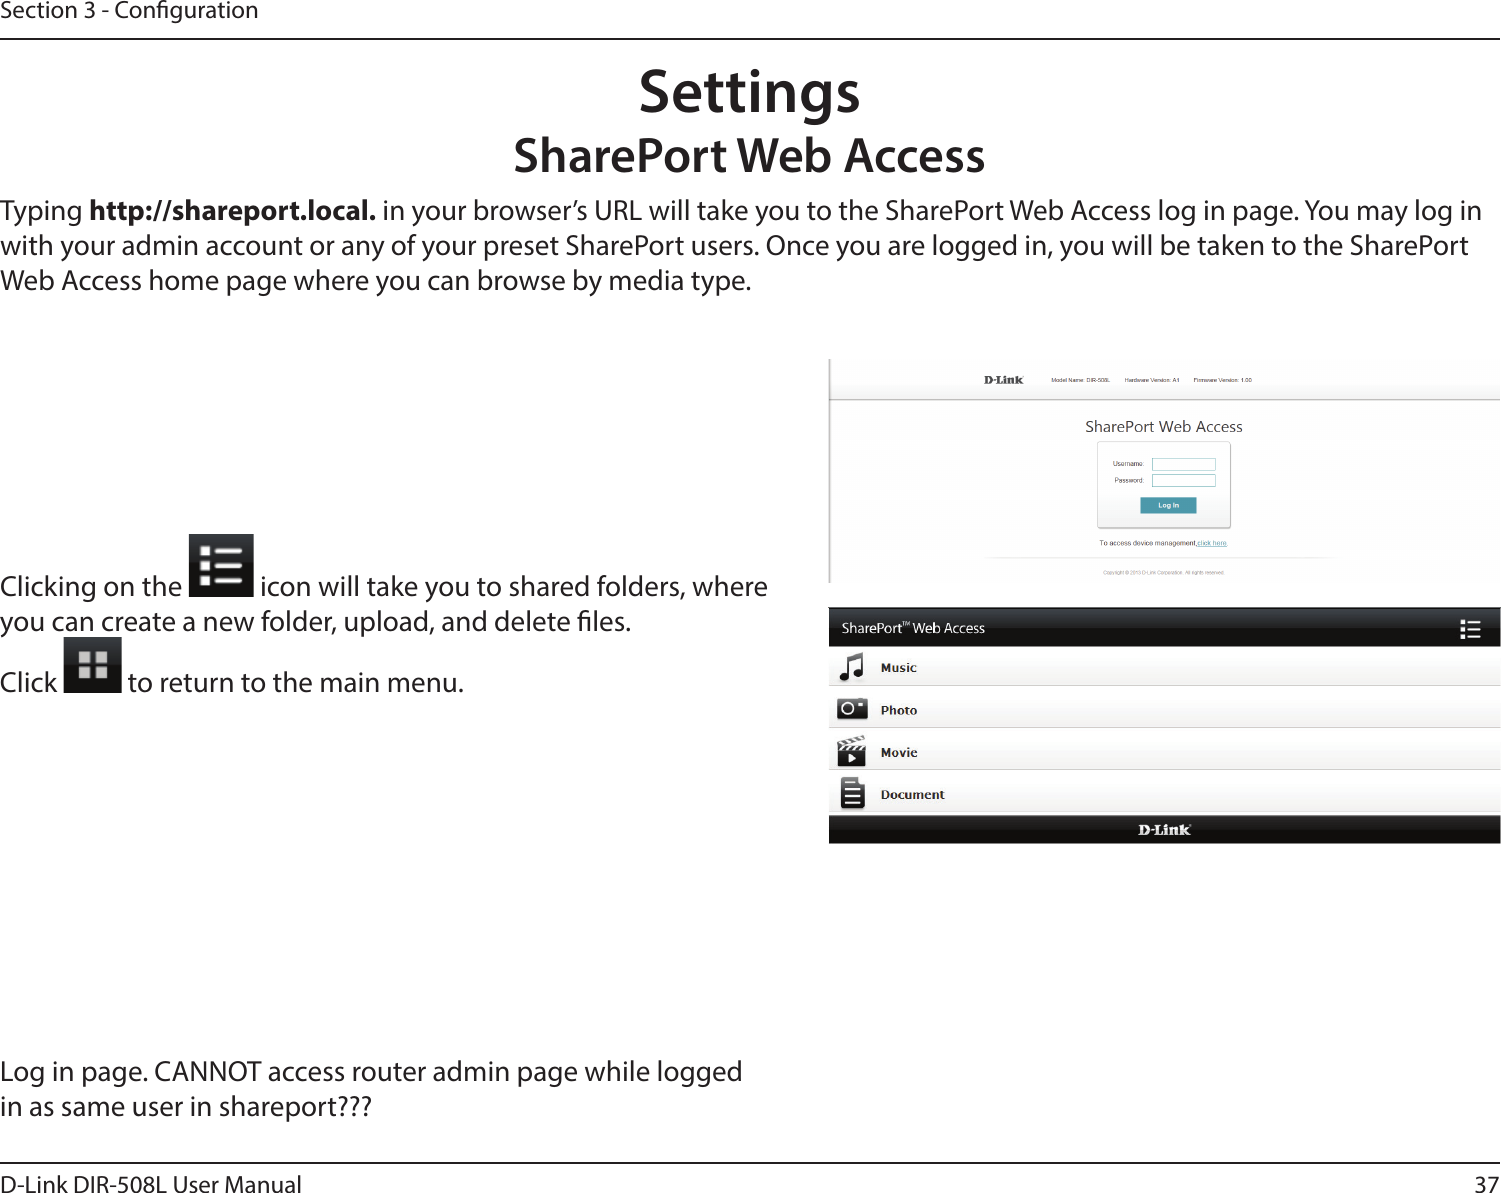 37D-Link DIR-508L User ManualSection 3 - CongurationSettingsSharePort Web AccessTyping http://shareport.local. in your browser’s URL will take you to the SharePort Web Access log in page. You may log in with your admin account or any of your preset SharePort users. Once you are logged in, you will be taken to the SharePort Web Access home page where you can browse by media type.Clicking on the   icon will take you to shared folders, where you can create a new folder, upload, and delete les.Click   to return to the main menu.Log in page. CANNOT access router admin page while logged in as same user in shareport???